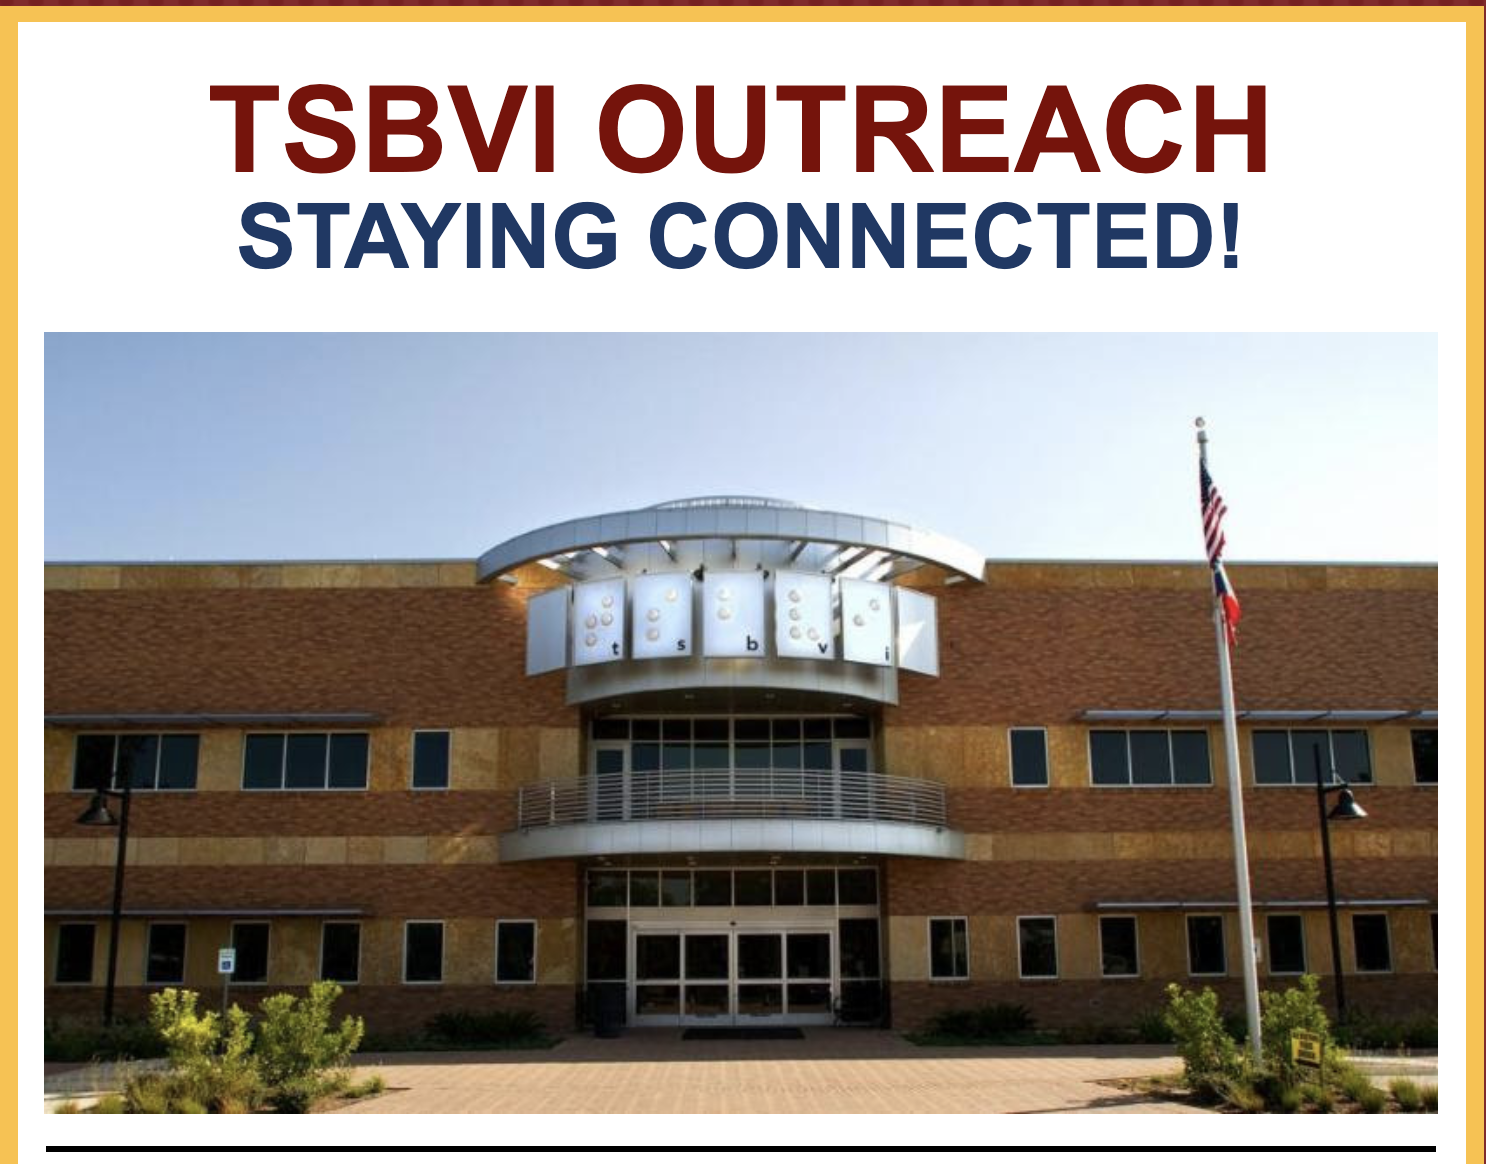 Image of TSBVI main building with text "TSBVI Outreach: Staying Connected"